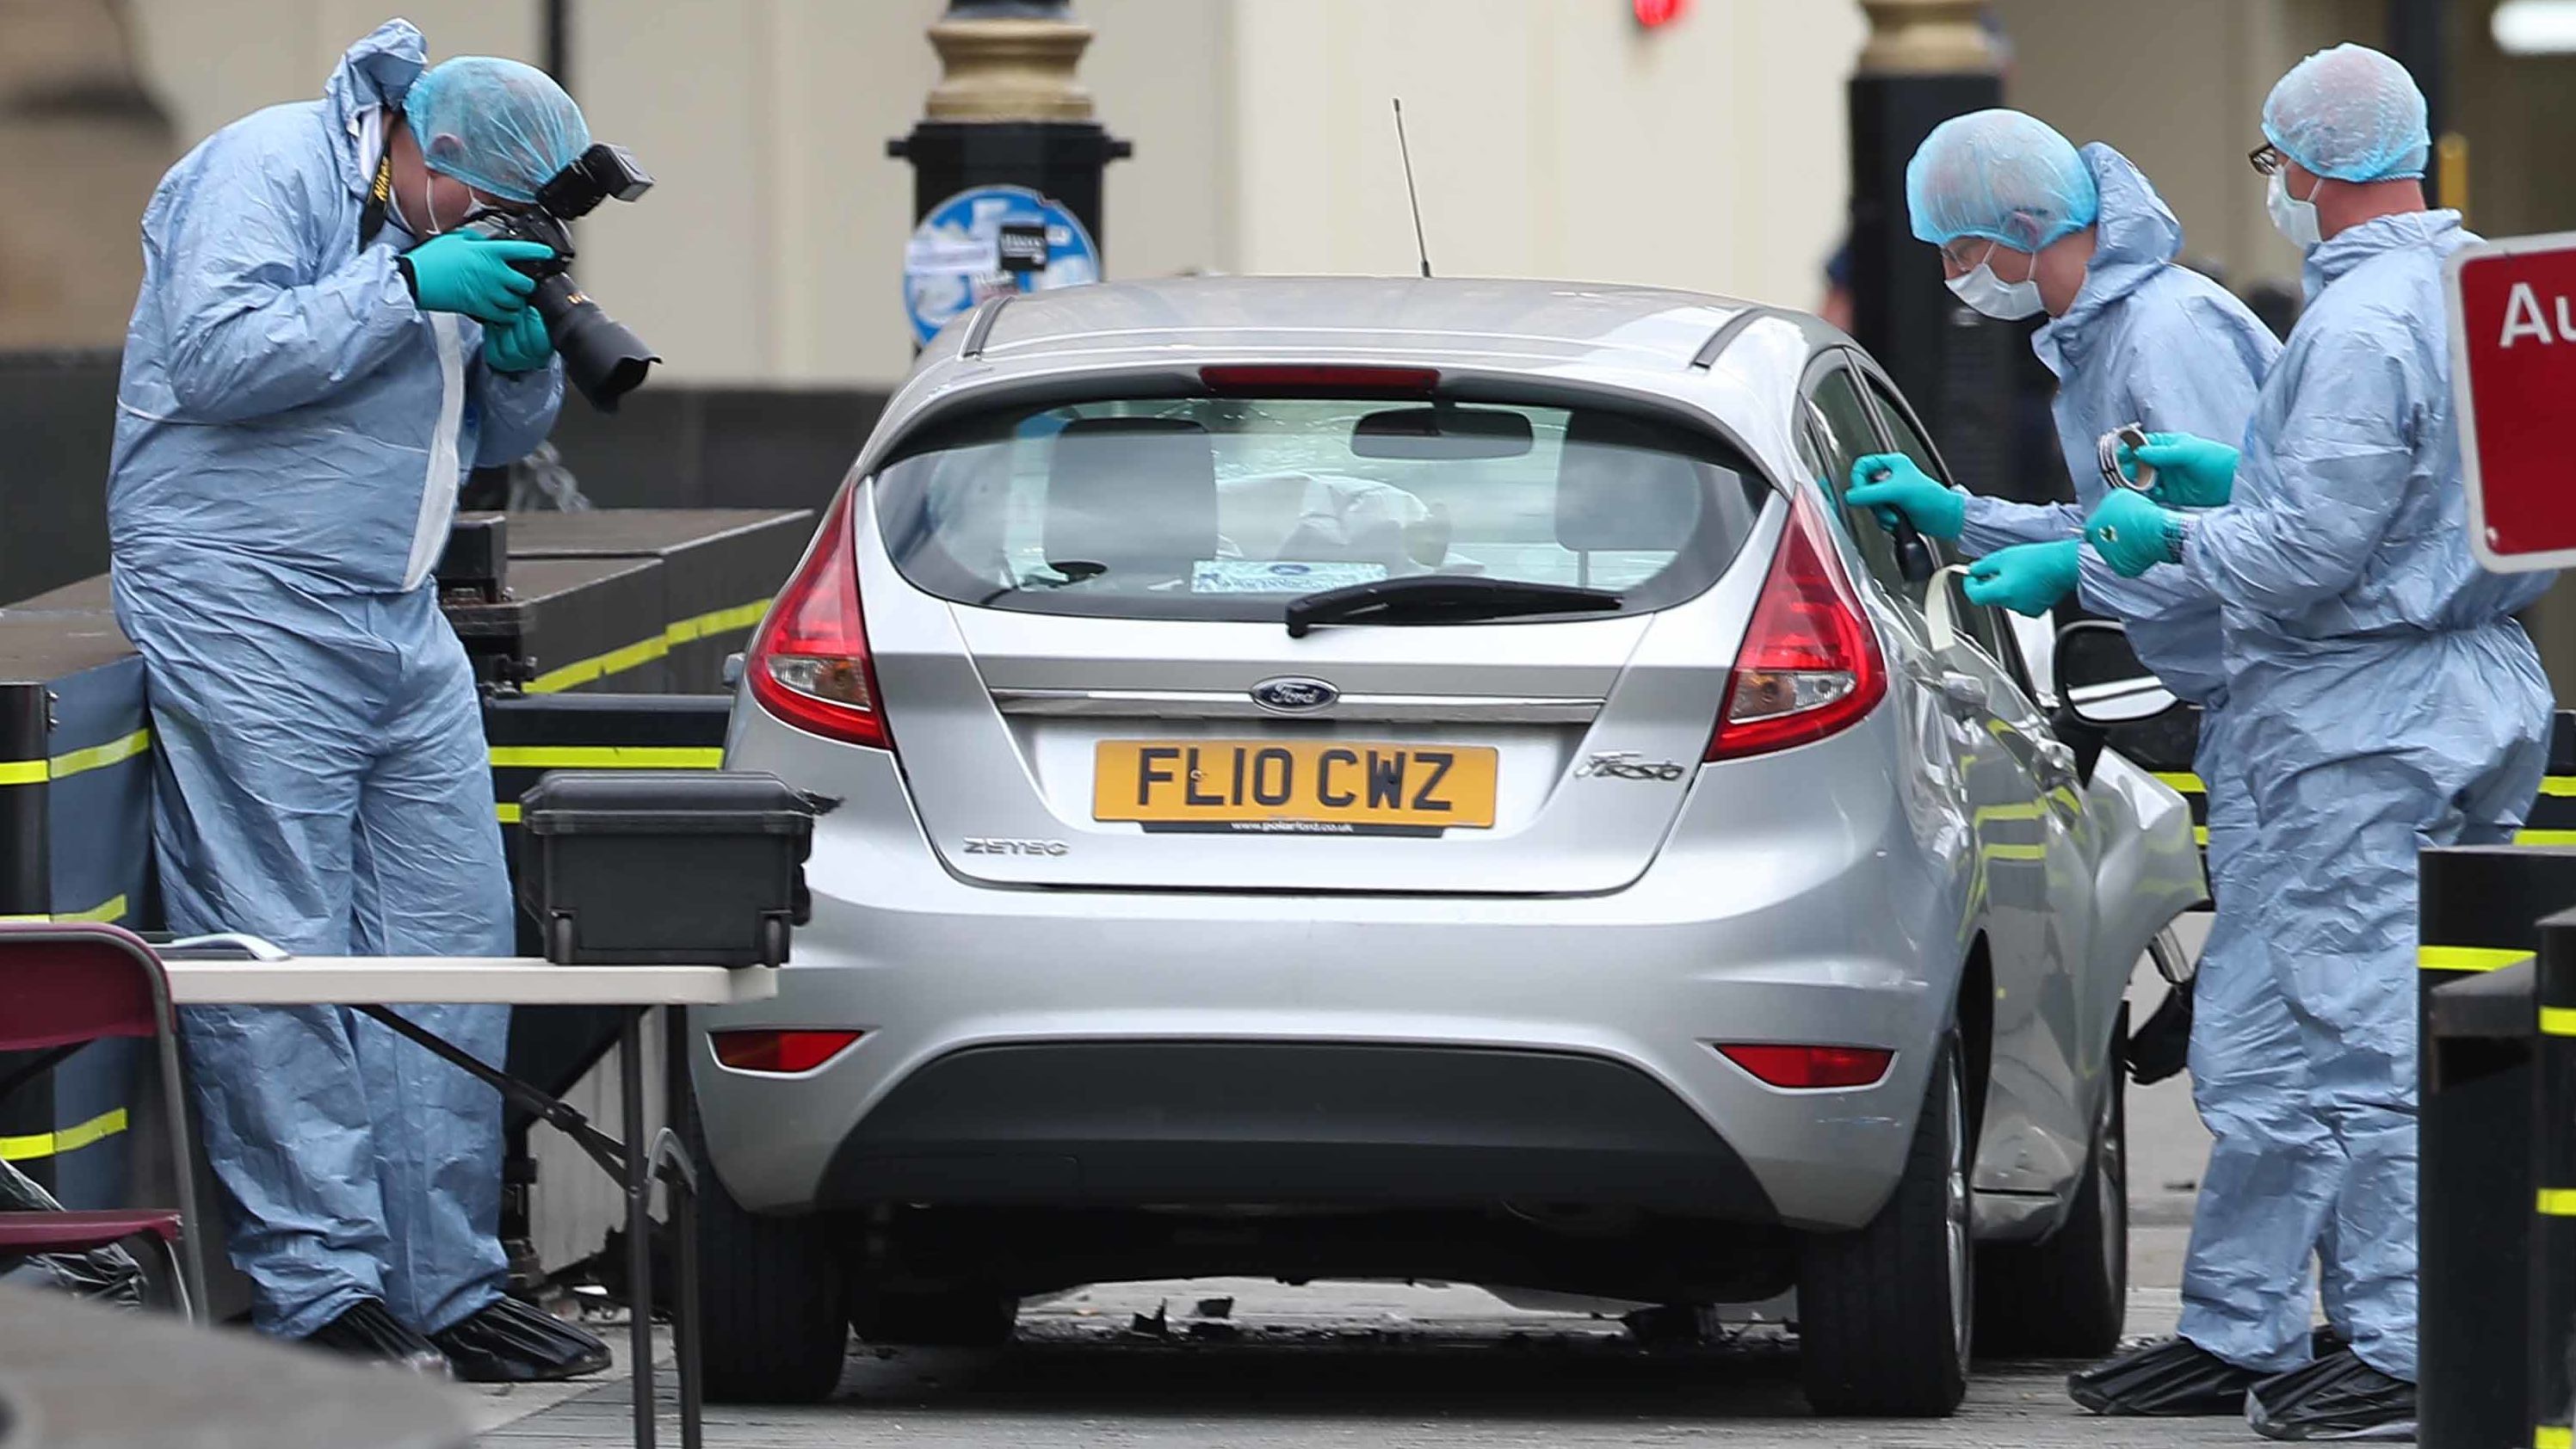 Police forensics officers work around a silver Ford Fiesta car that was driven into a barrier at the Houses of Parliament in central London on August 14.